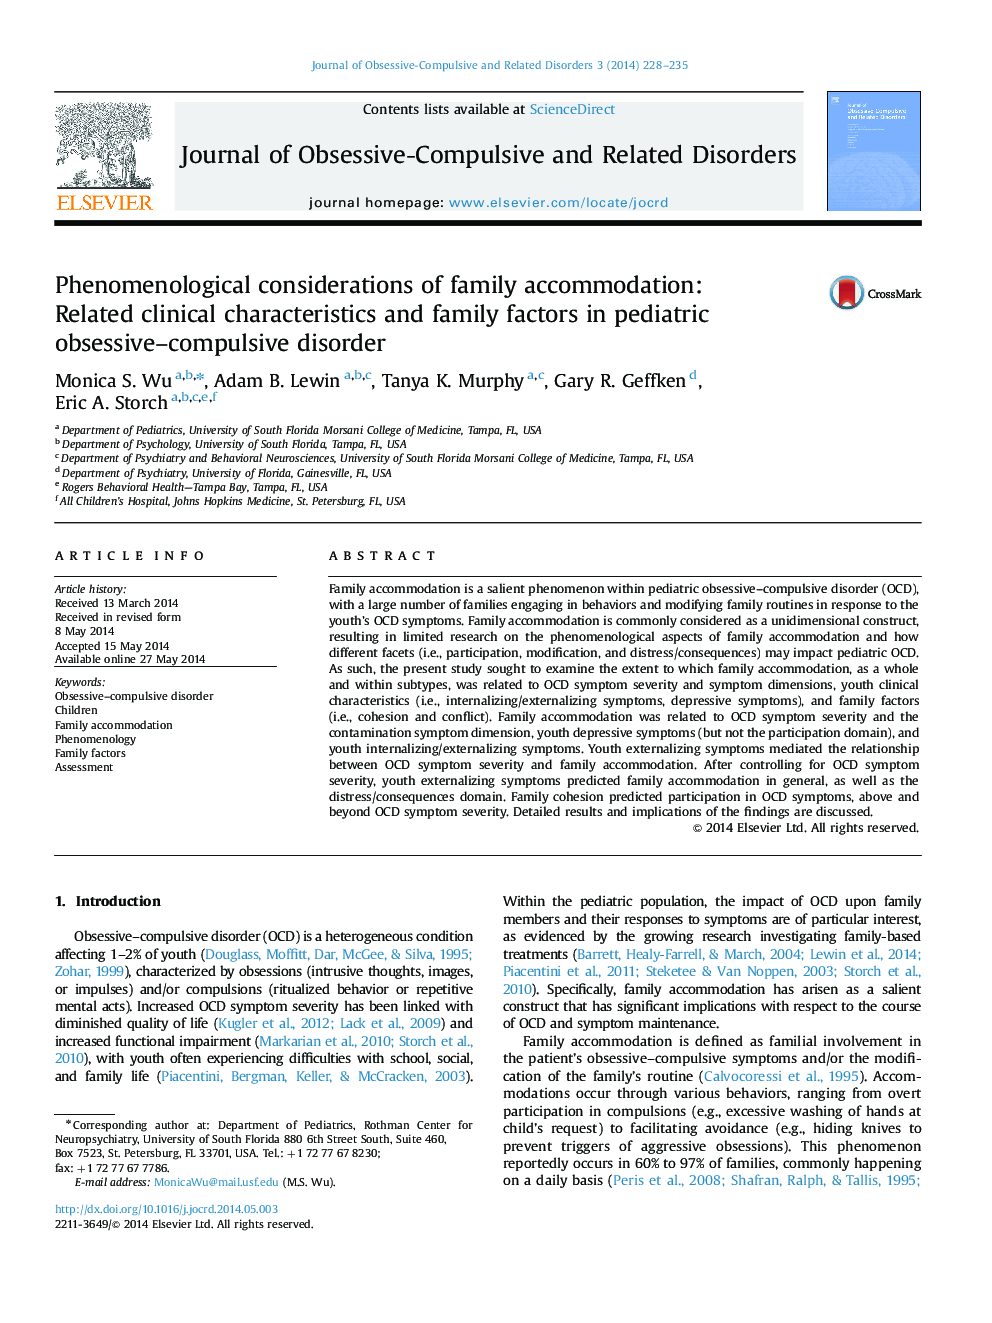 Phenomenological considerations of family accommodation: Related clinical characteristics and family factors in pediatric obsessive–compulsive disorder